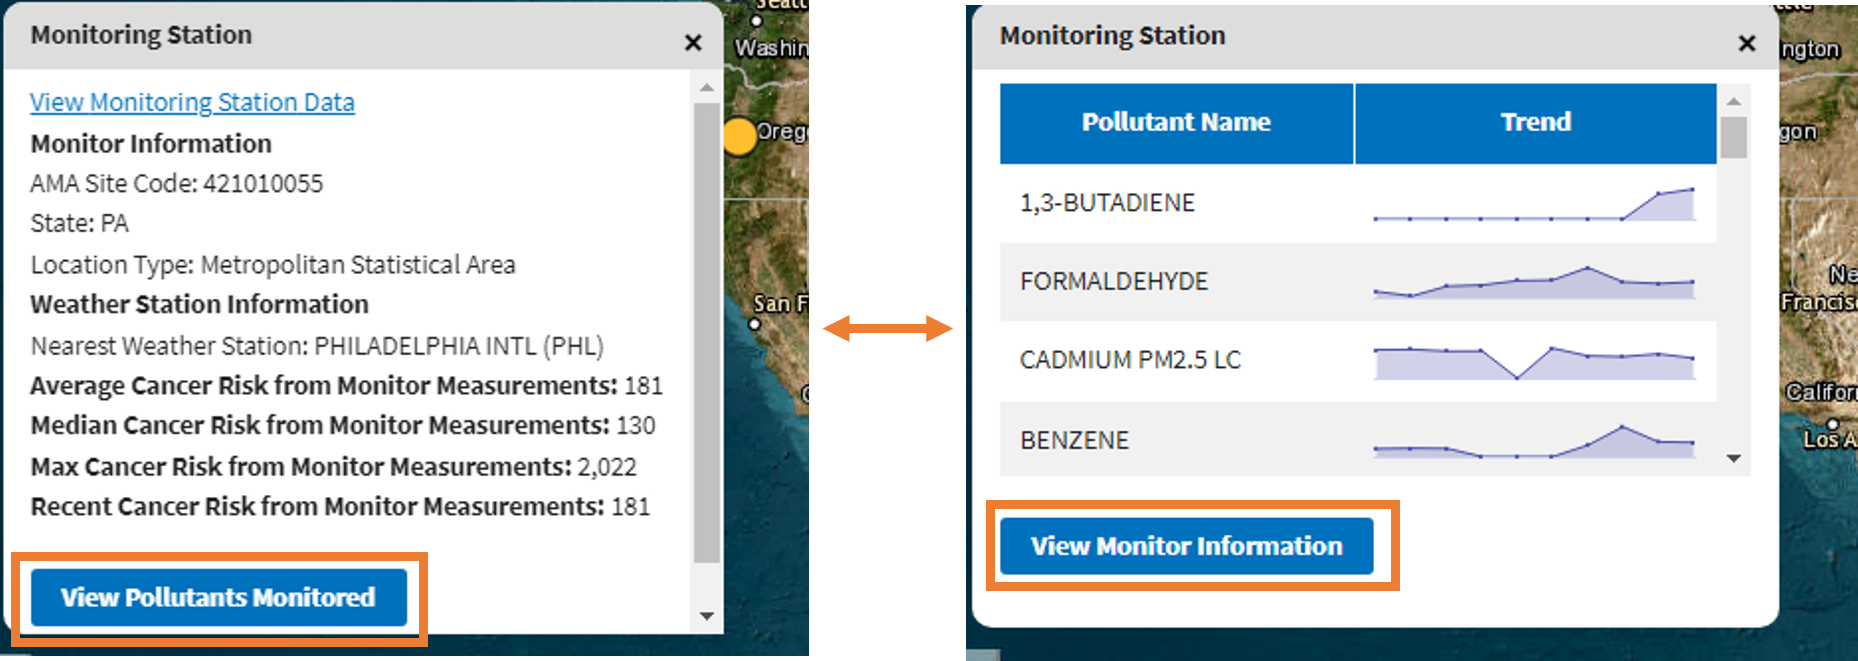 Pollutants Monitored and Monitor Information pop-up screens on search results map